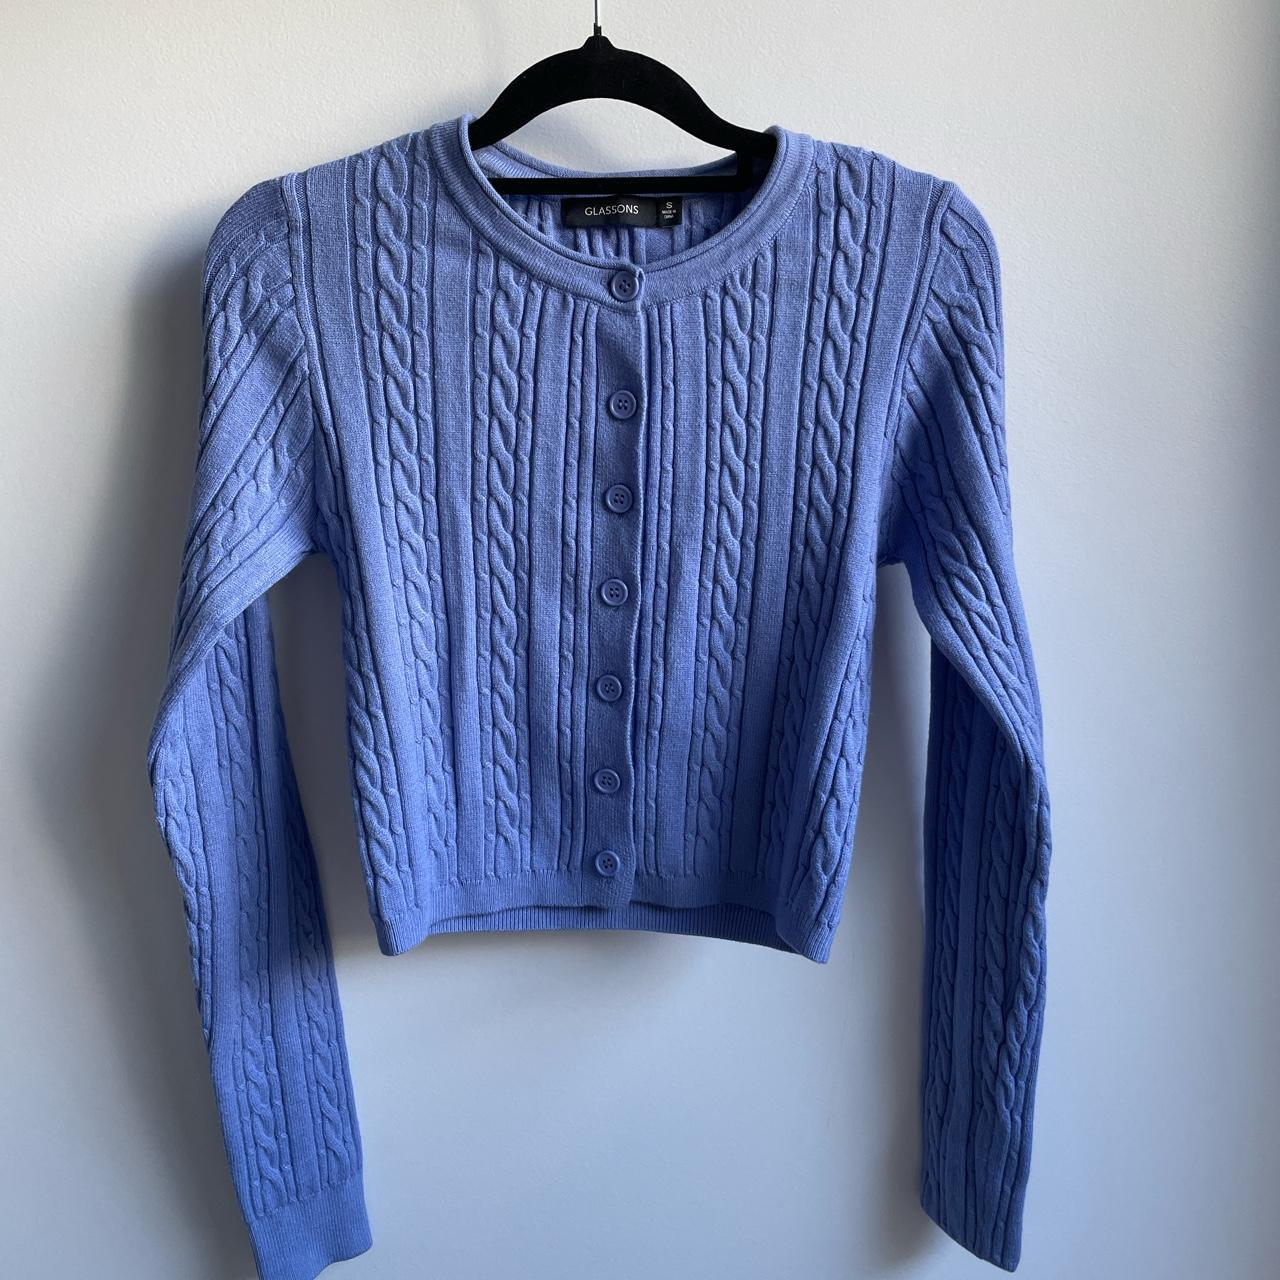 Glassons Blue Cable Knit Cardigan and Mini Skirt. In... - Depop